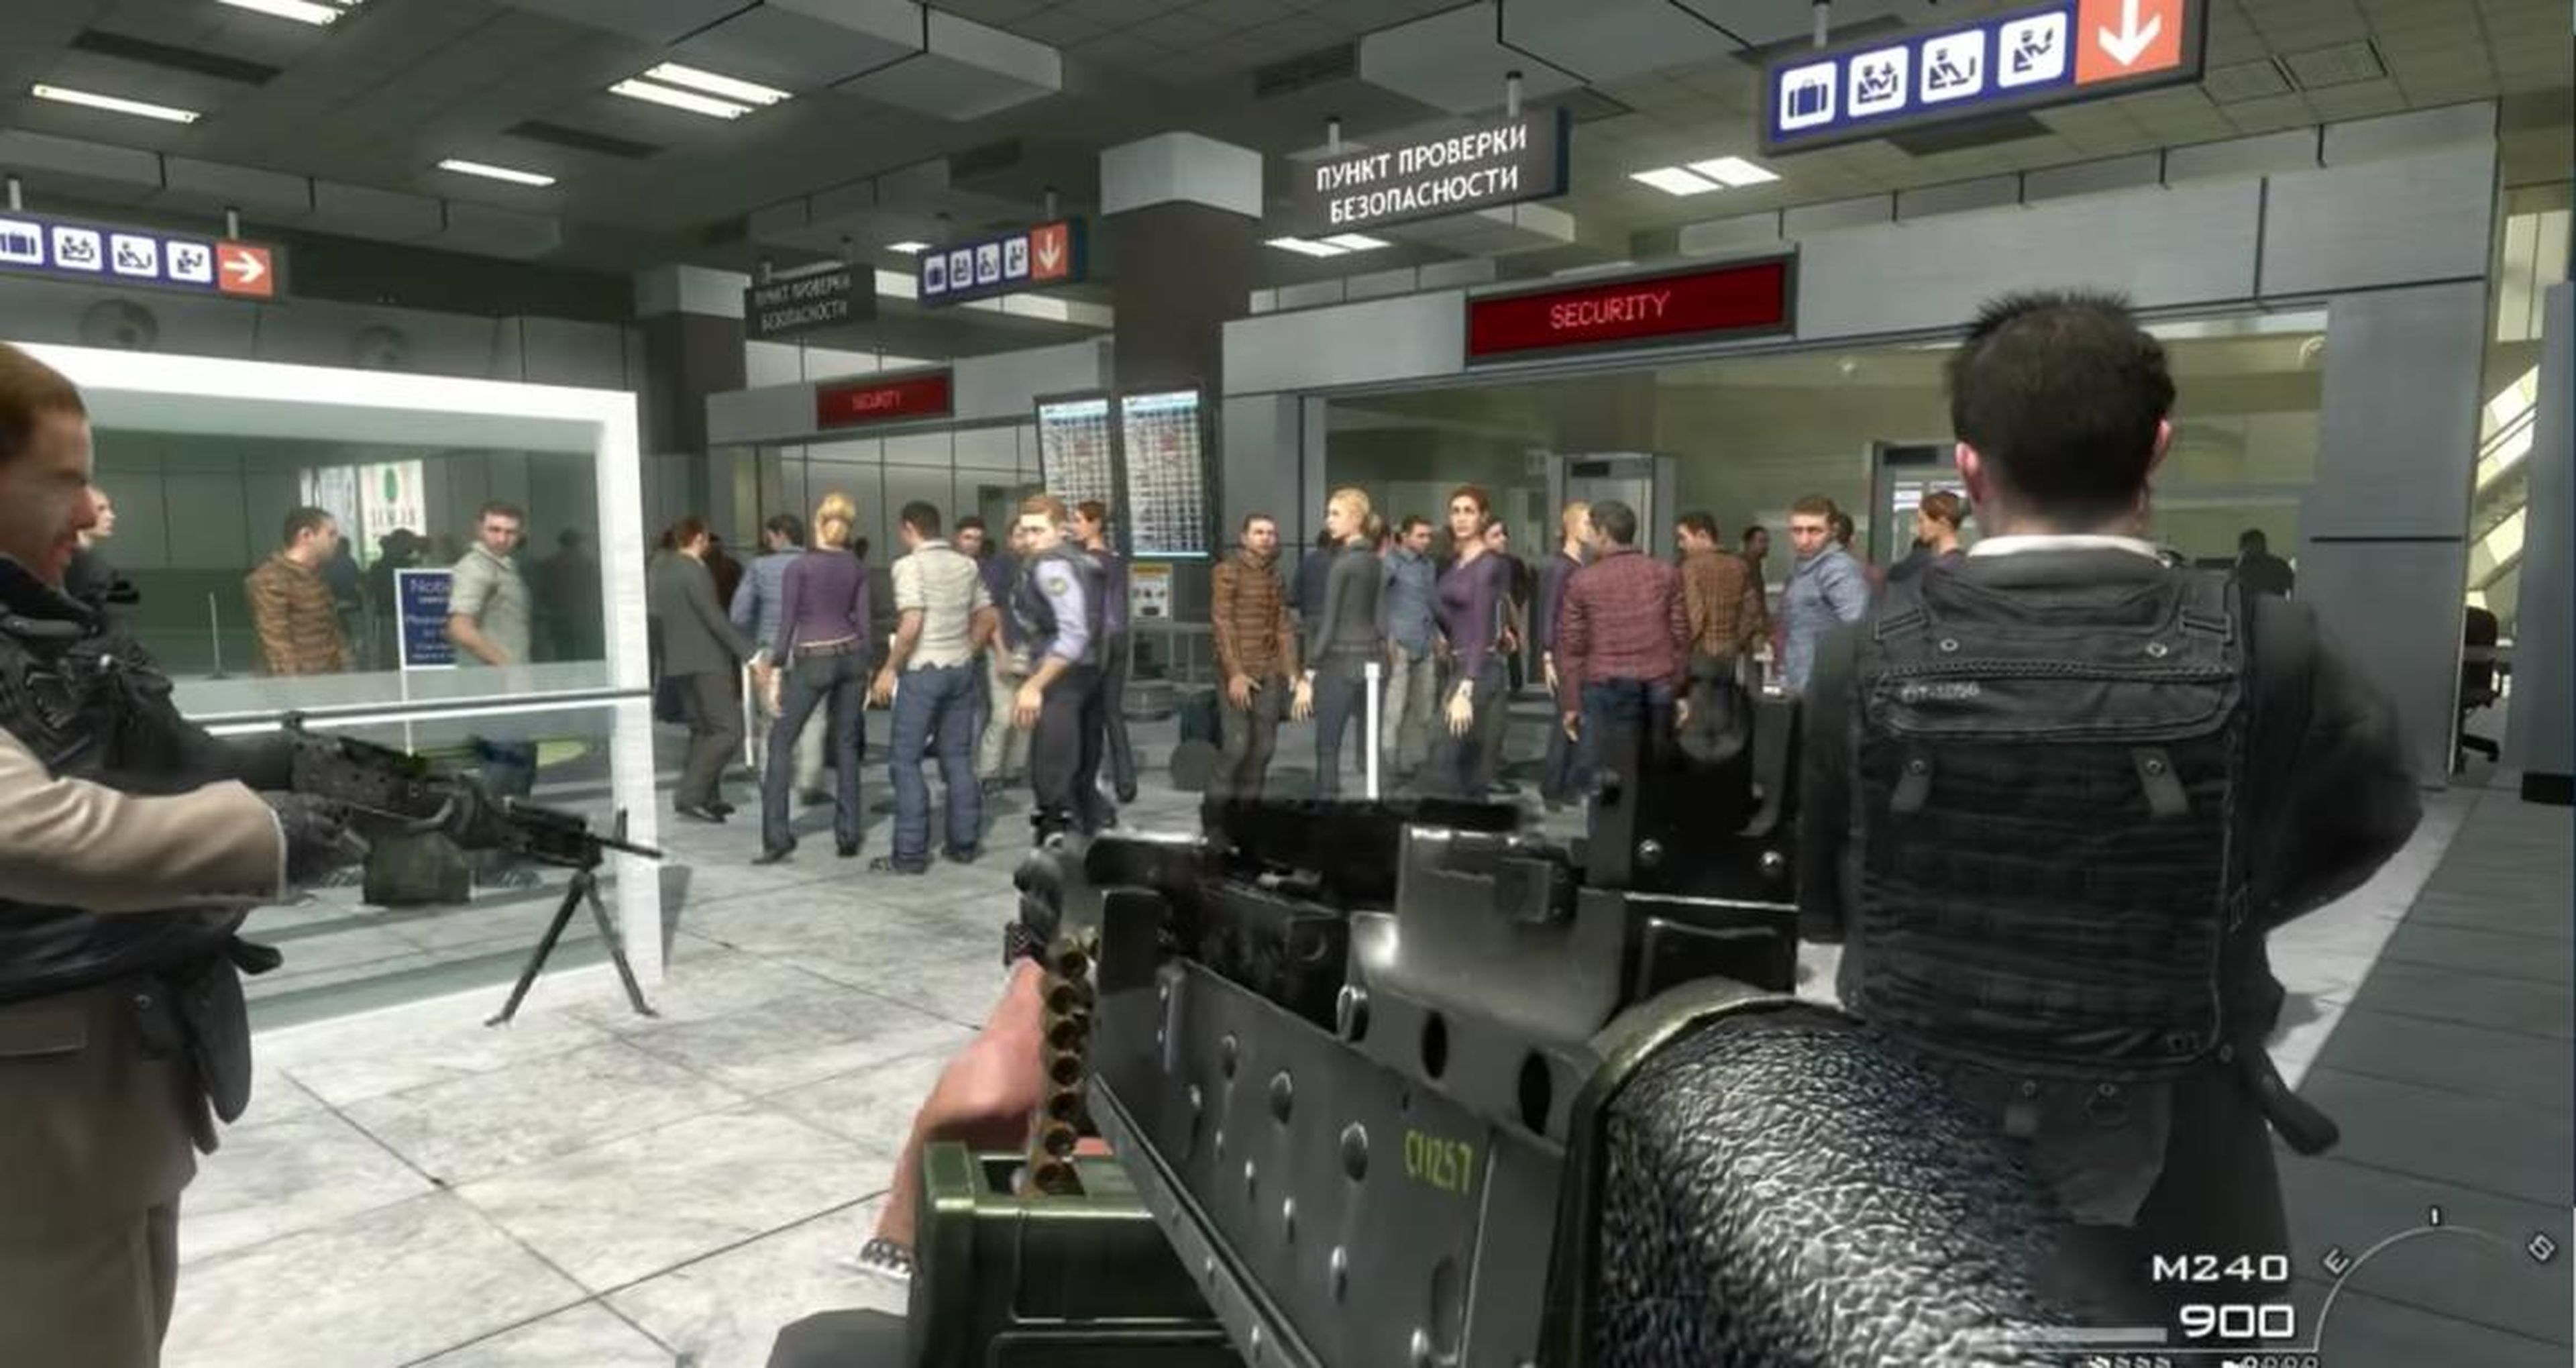 During a controversial campaign mission in "Call of Duty: Modern Warfare 2," players can choose to shoot civilians in a Russian airport.